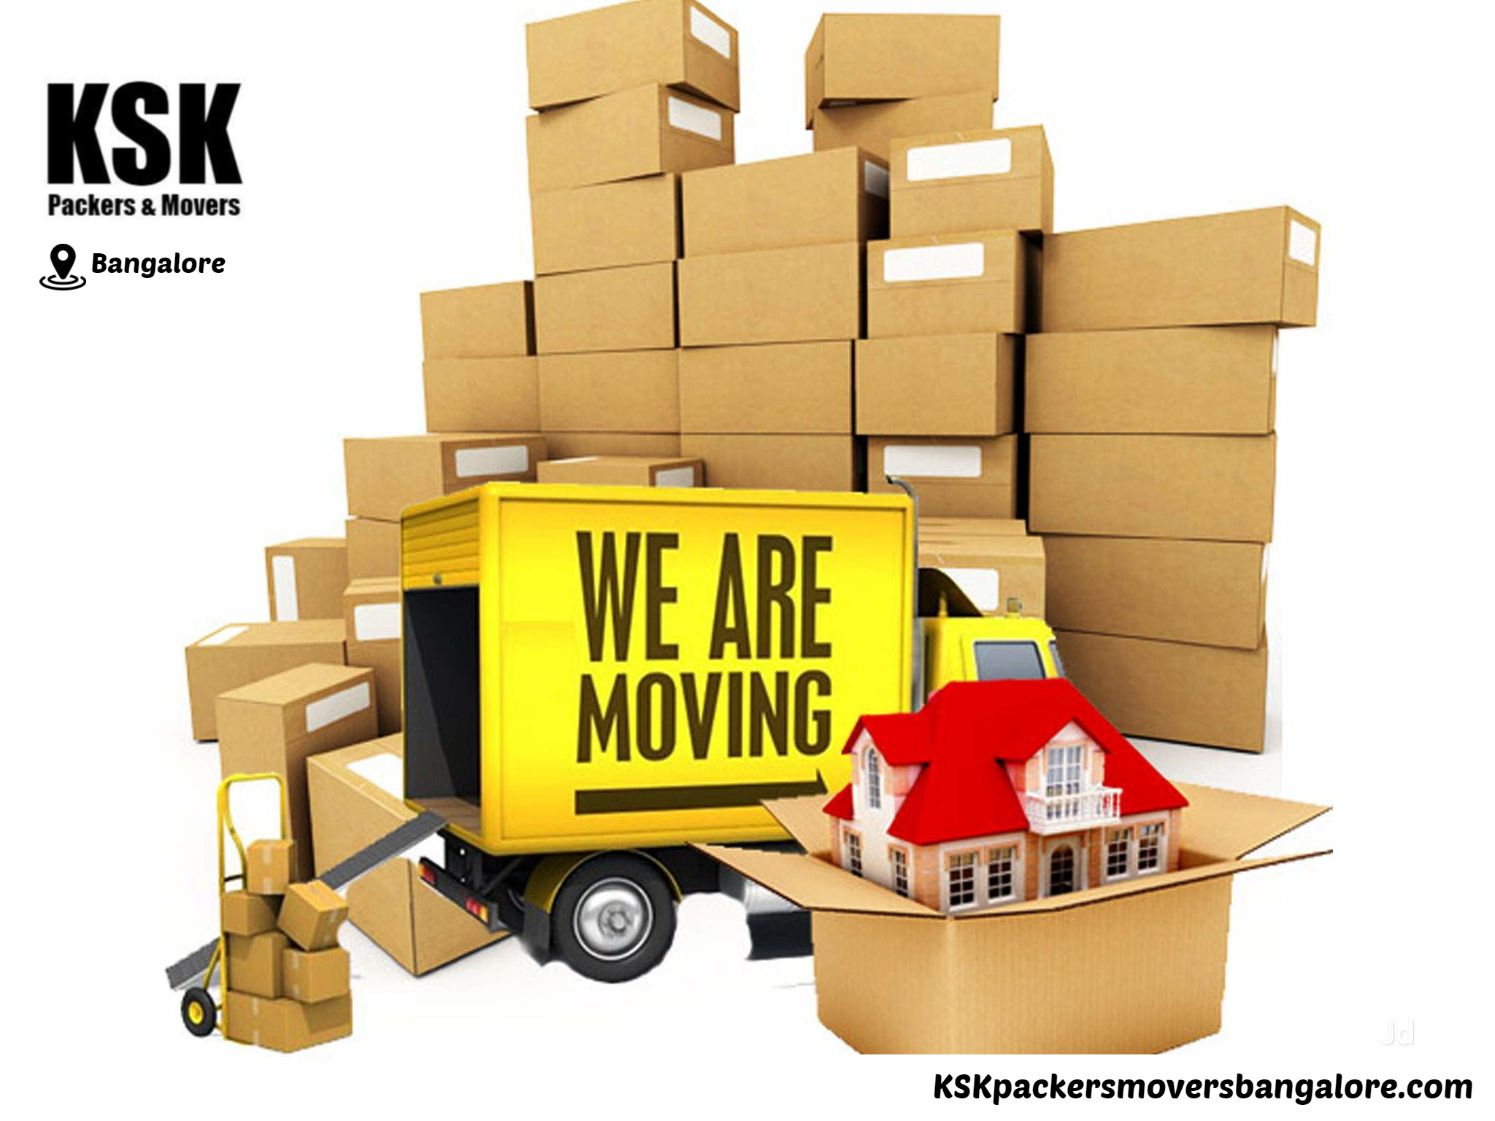 Packers And Movers In Bangalore - Book Trusted & Verified Packers Movers Bangalore - kskpackersandmovers.com.ServicesMovers & PackersAll Indiaother